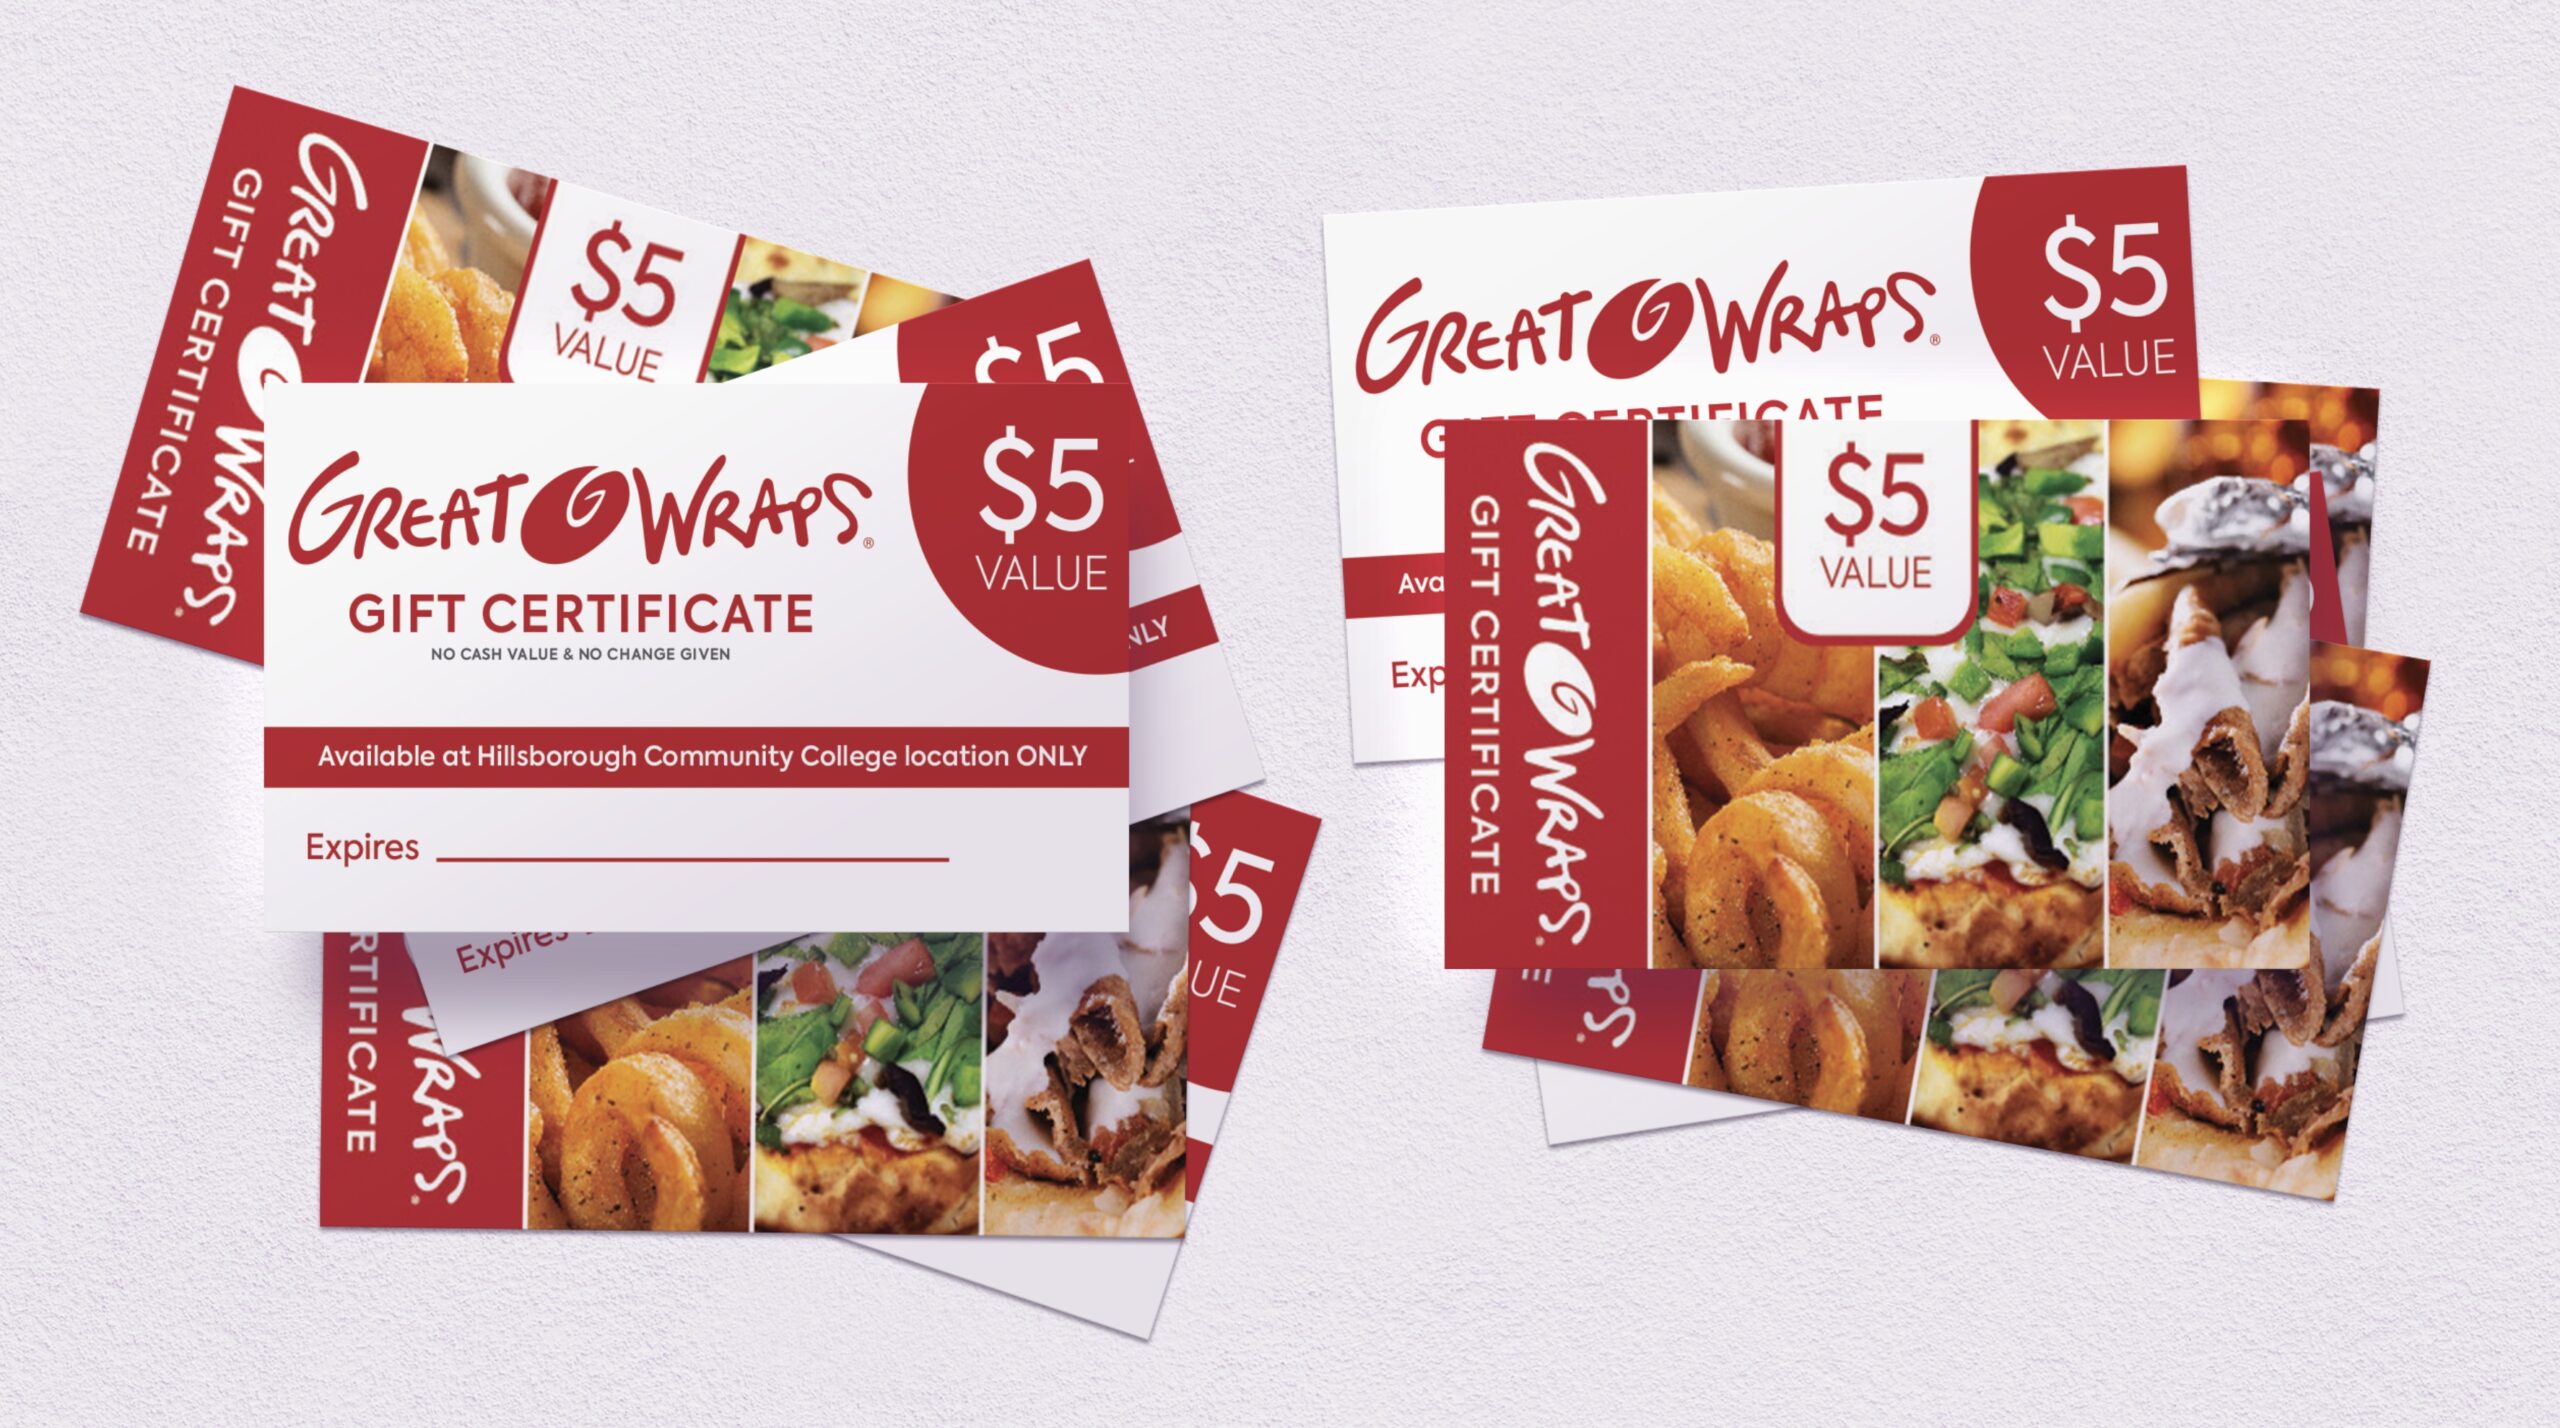 great wraps - gift certificate - graphic design marketing